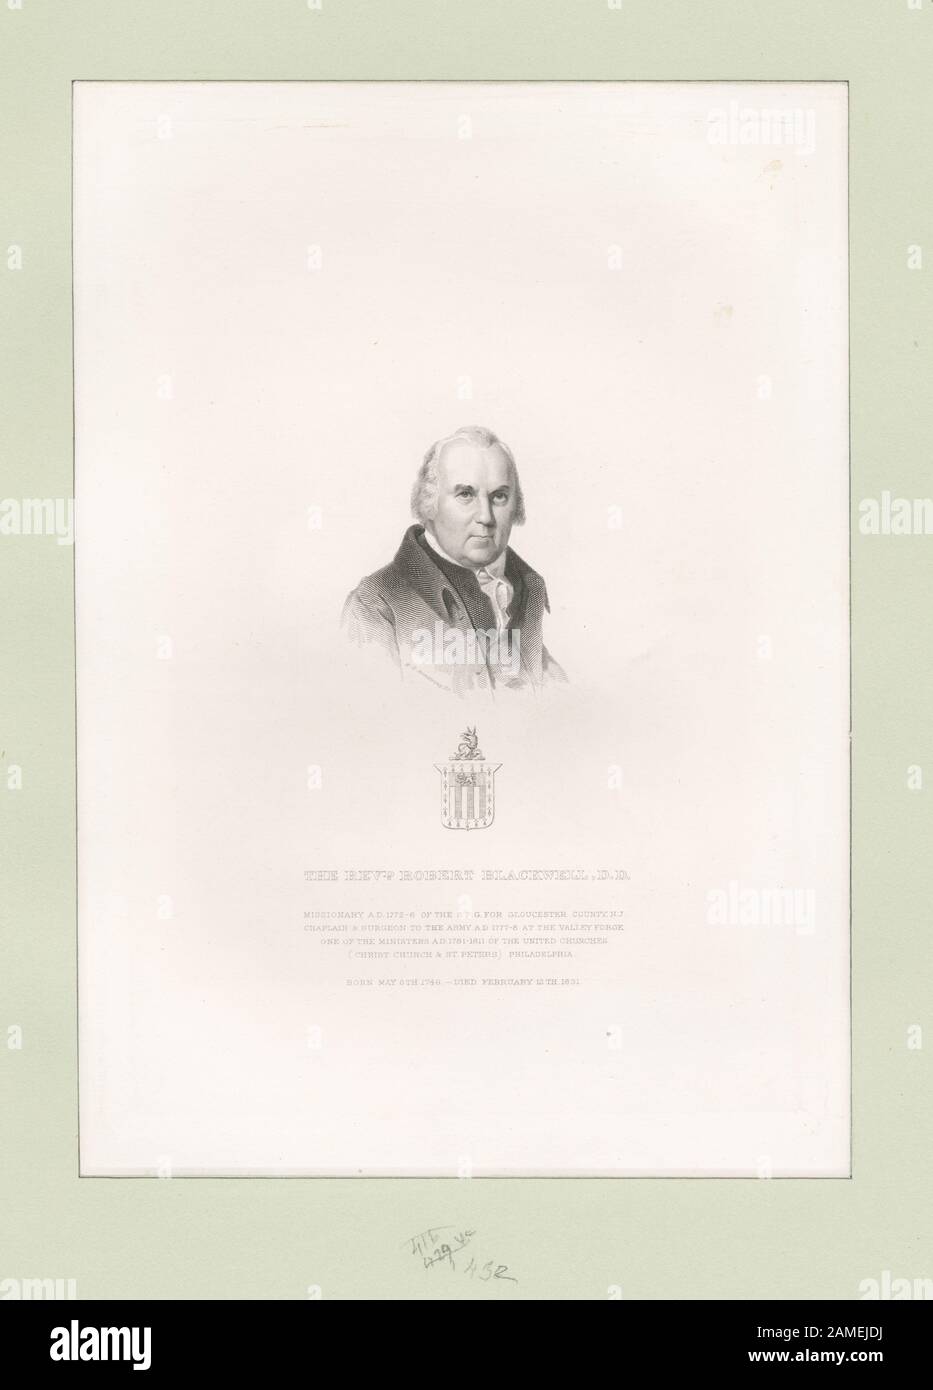 The Revd Robert Blackwell, DD  Includes photomechanical reproductions. Printmakers include Francesco Bartolozzi, William Russell Birch, Asher Brown Durand, James Barton Longacre, Archibald Robertson, Samuel Sartain & Hezekiah Wright Smith.  Draughtsmen include David McNeely Stauffer. Title from Calendar of Emmet Collection. EM10281 Statement of responsibility : W.G. Armstrong; The Revd. Robert Blackwell, D.D.... Stock Photo